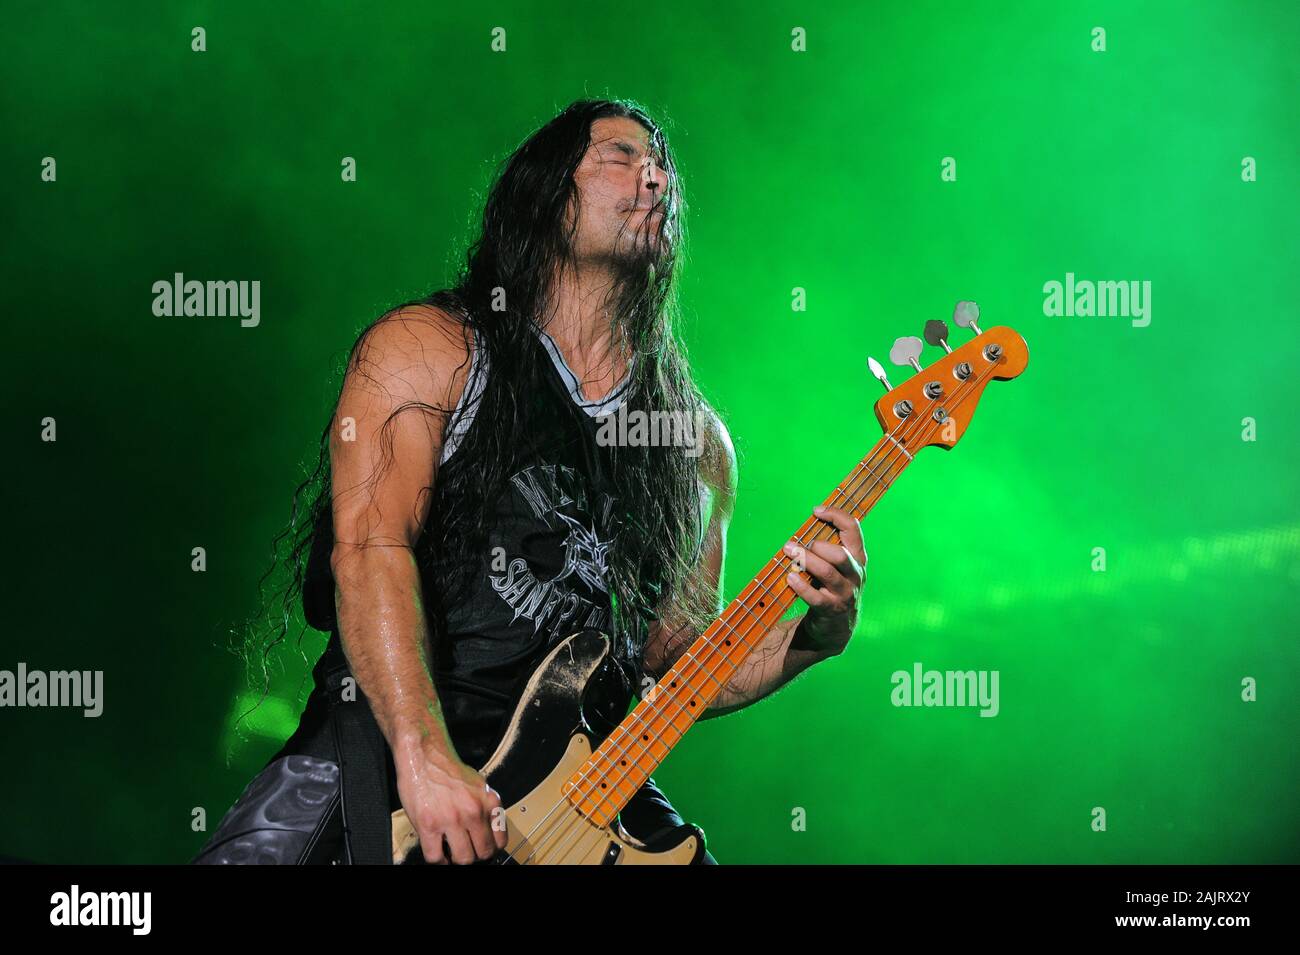 Milan  Italy , 06 July 2011 , Live concert of 'The Big 4' at the 'Arena Concerti Fiera Milano' : The bassist Robert Trujillo of the Metallica band, during the concert Stock Photo